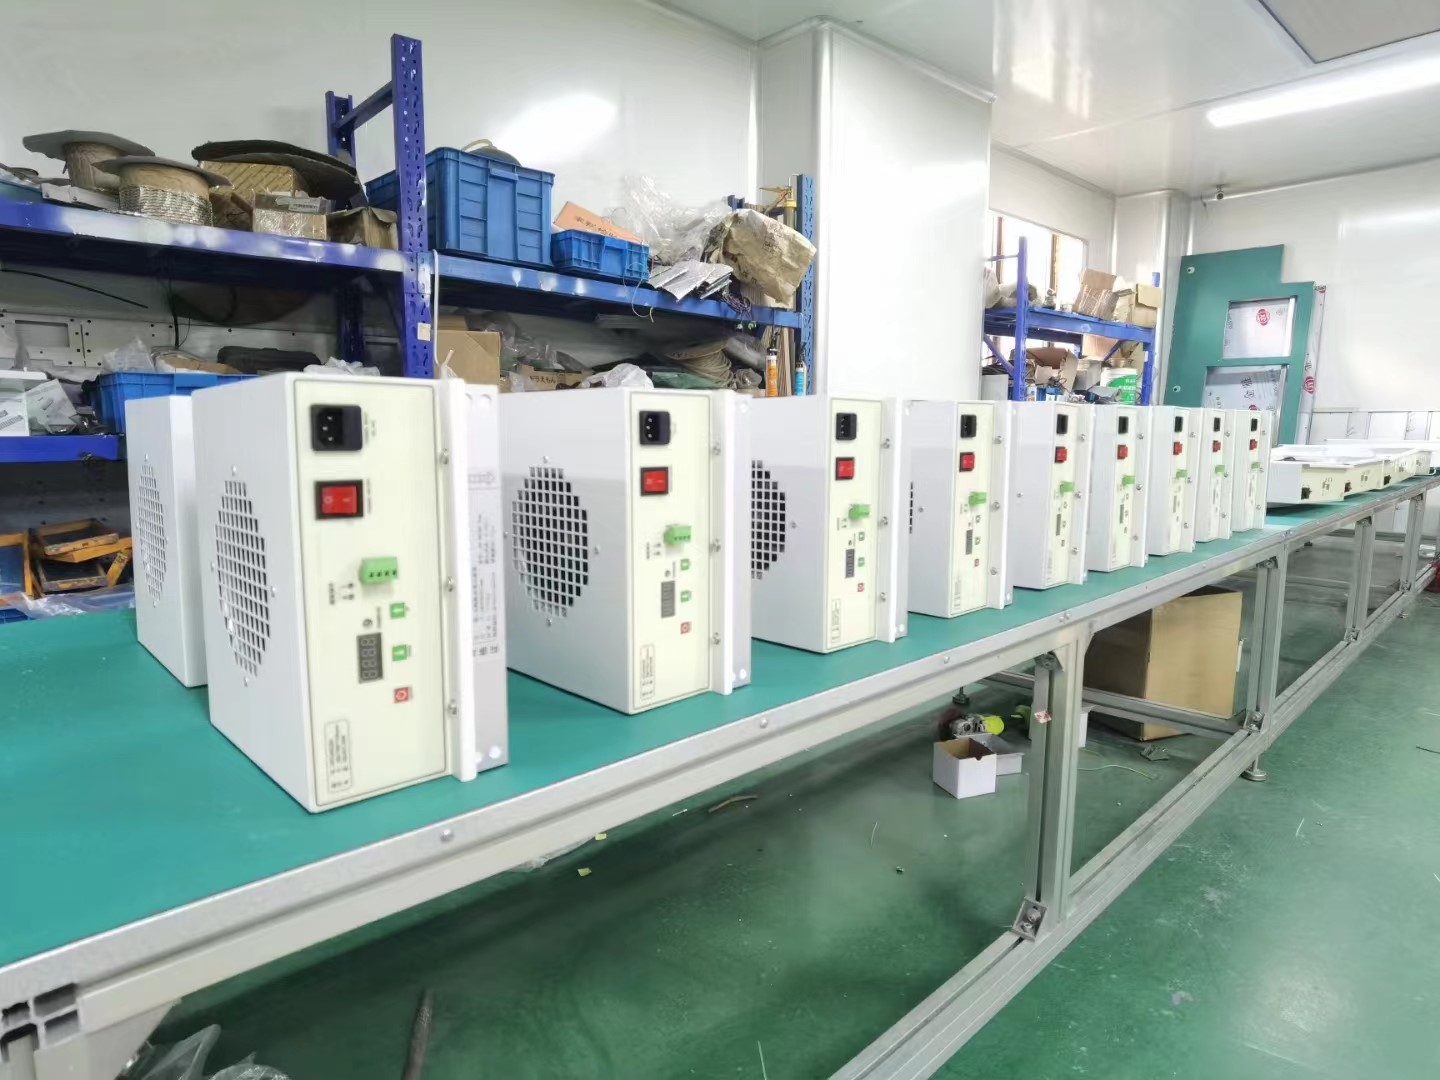 INTRODUCTION TO FFU FAN FILTER UNIT MAIN FEATURES